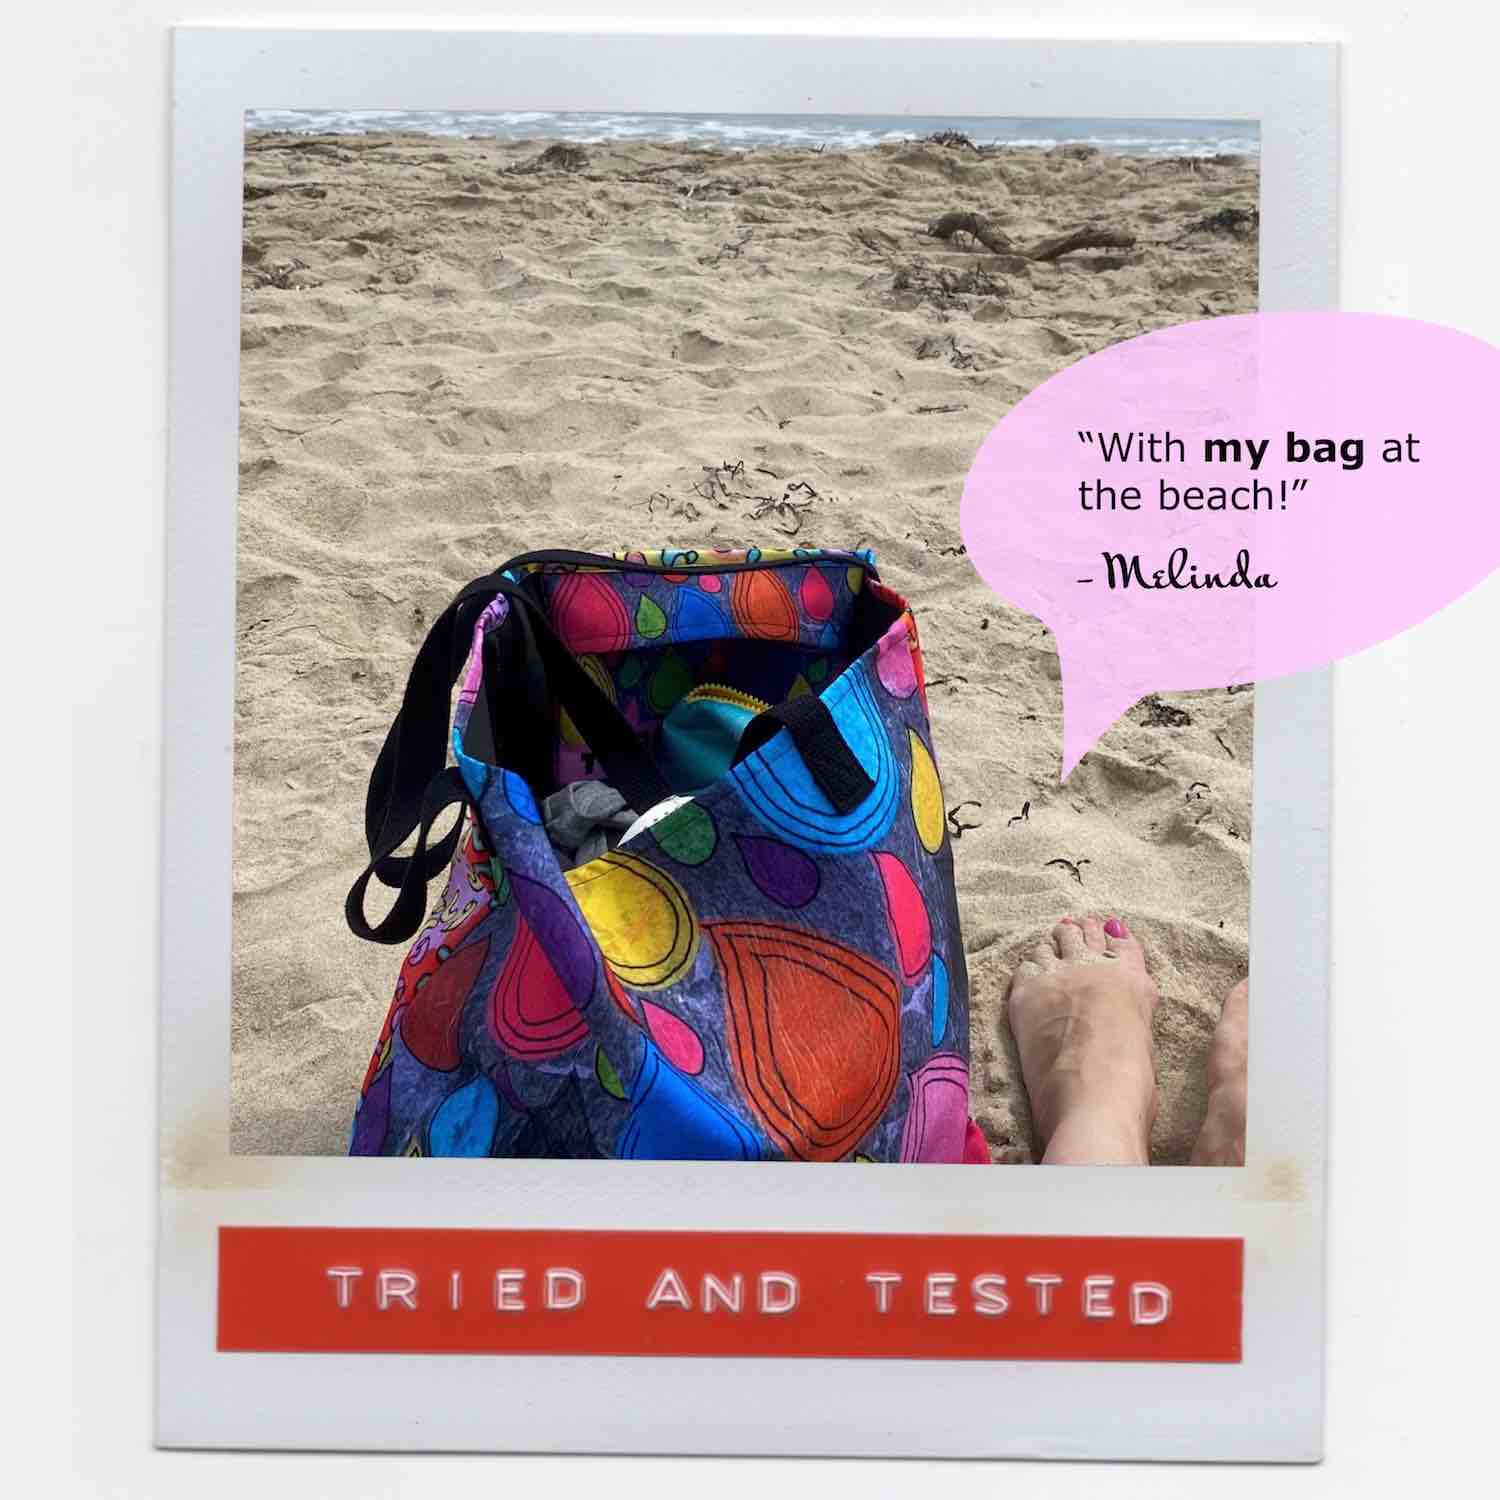 Melinda sitting on the beach with her multicolor tote bag in the sand next to her painted toenails.